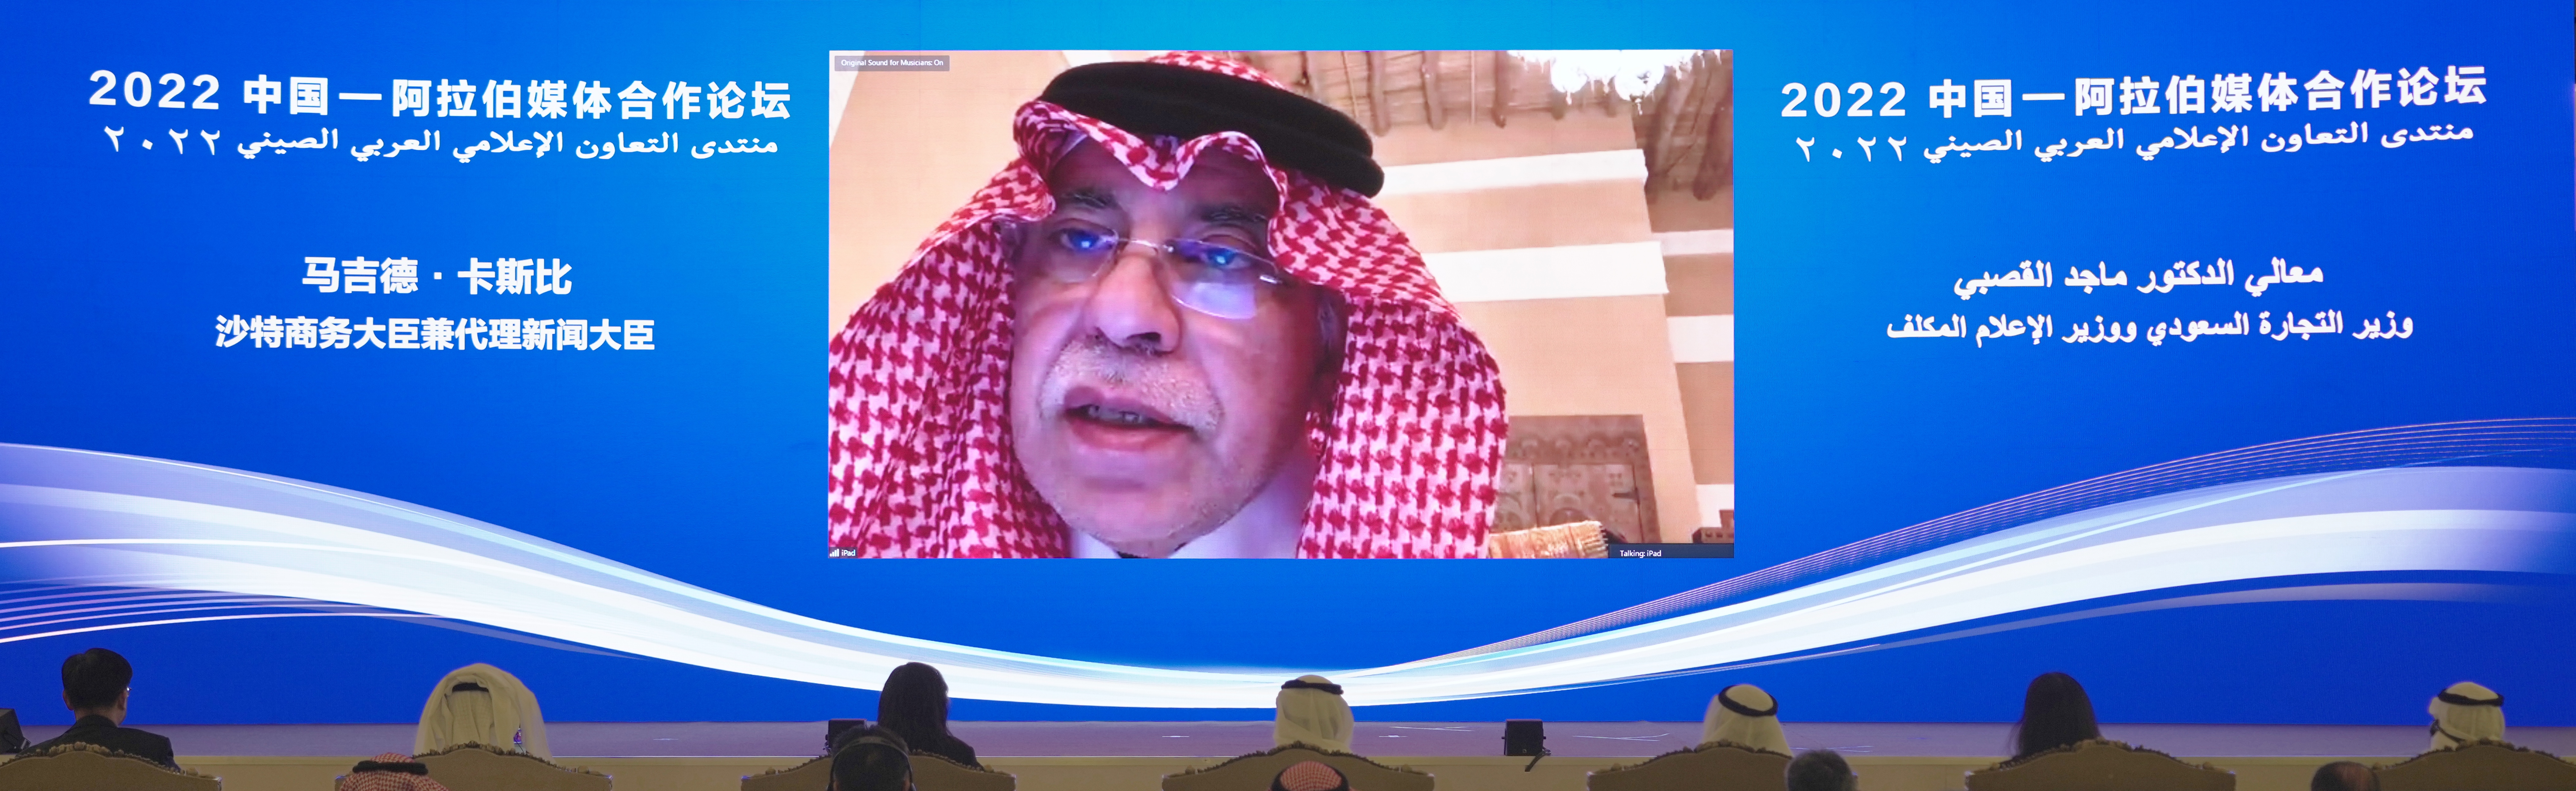 Dr Majid Al Qasabi, Saudi Arabian Minister of Commerce and Acting Minister of Media, delivers a speech via video, extending his support for the cooperation. /CMG